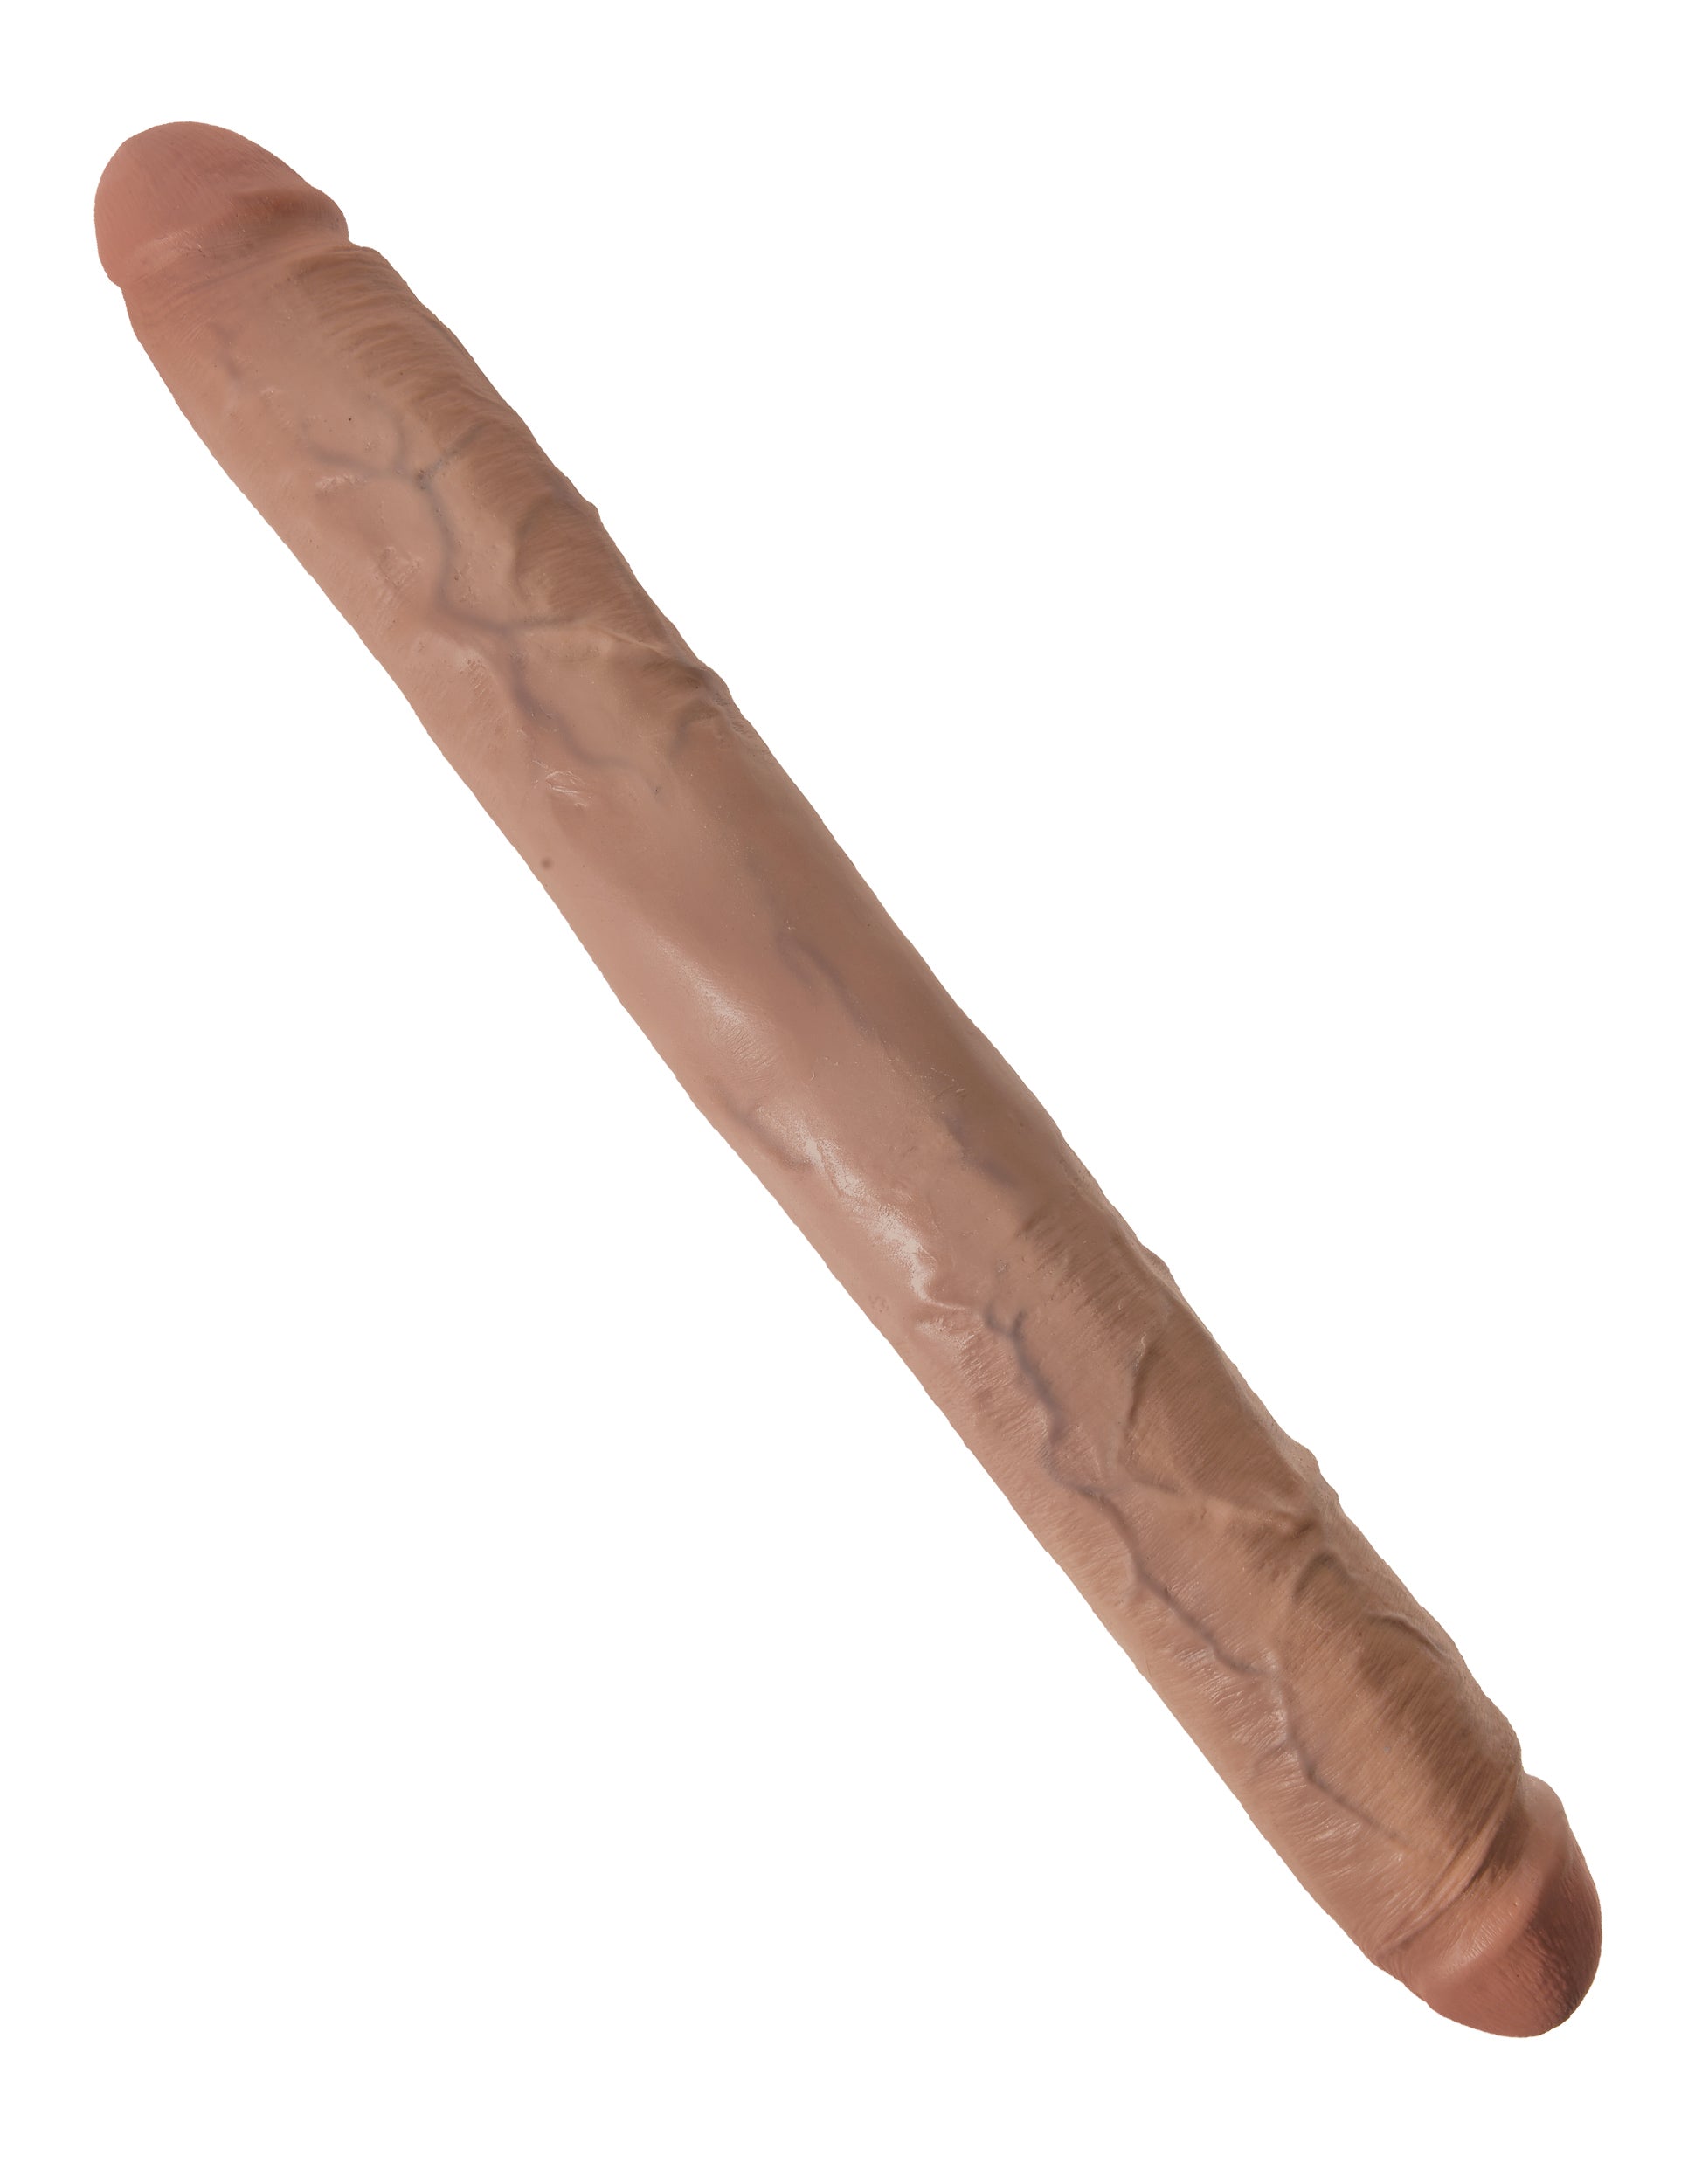 King Cock  16&quot; Thick Double Dildo - Tan